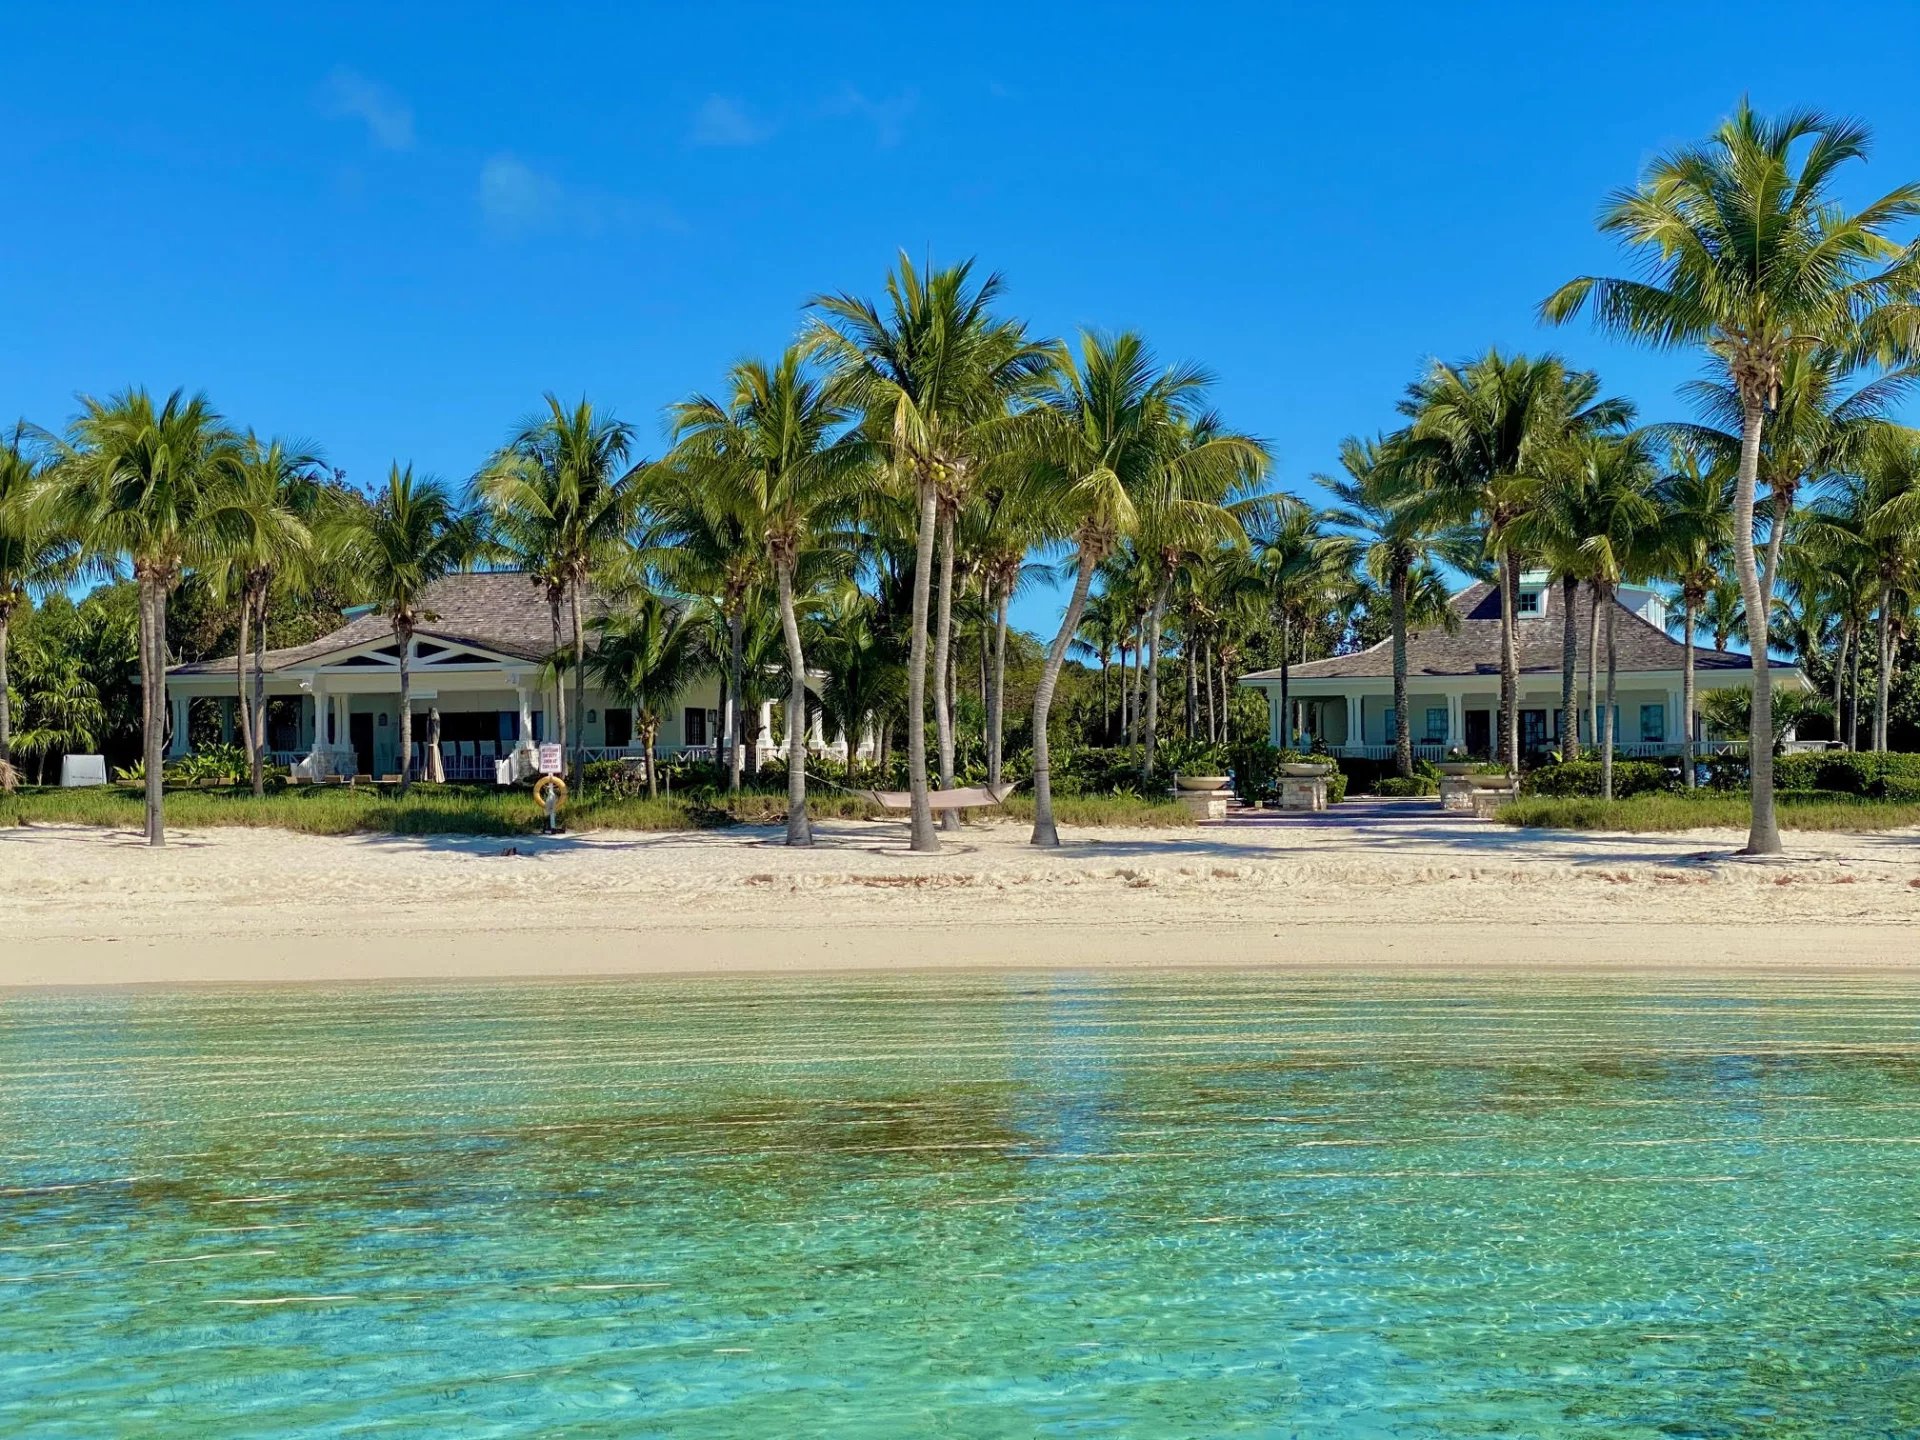 royal island, the perfect private island opportunity - mls 51444 image9